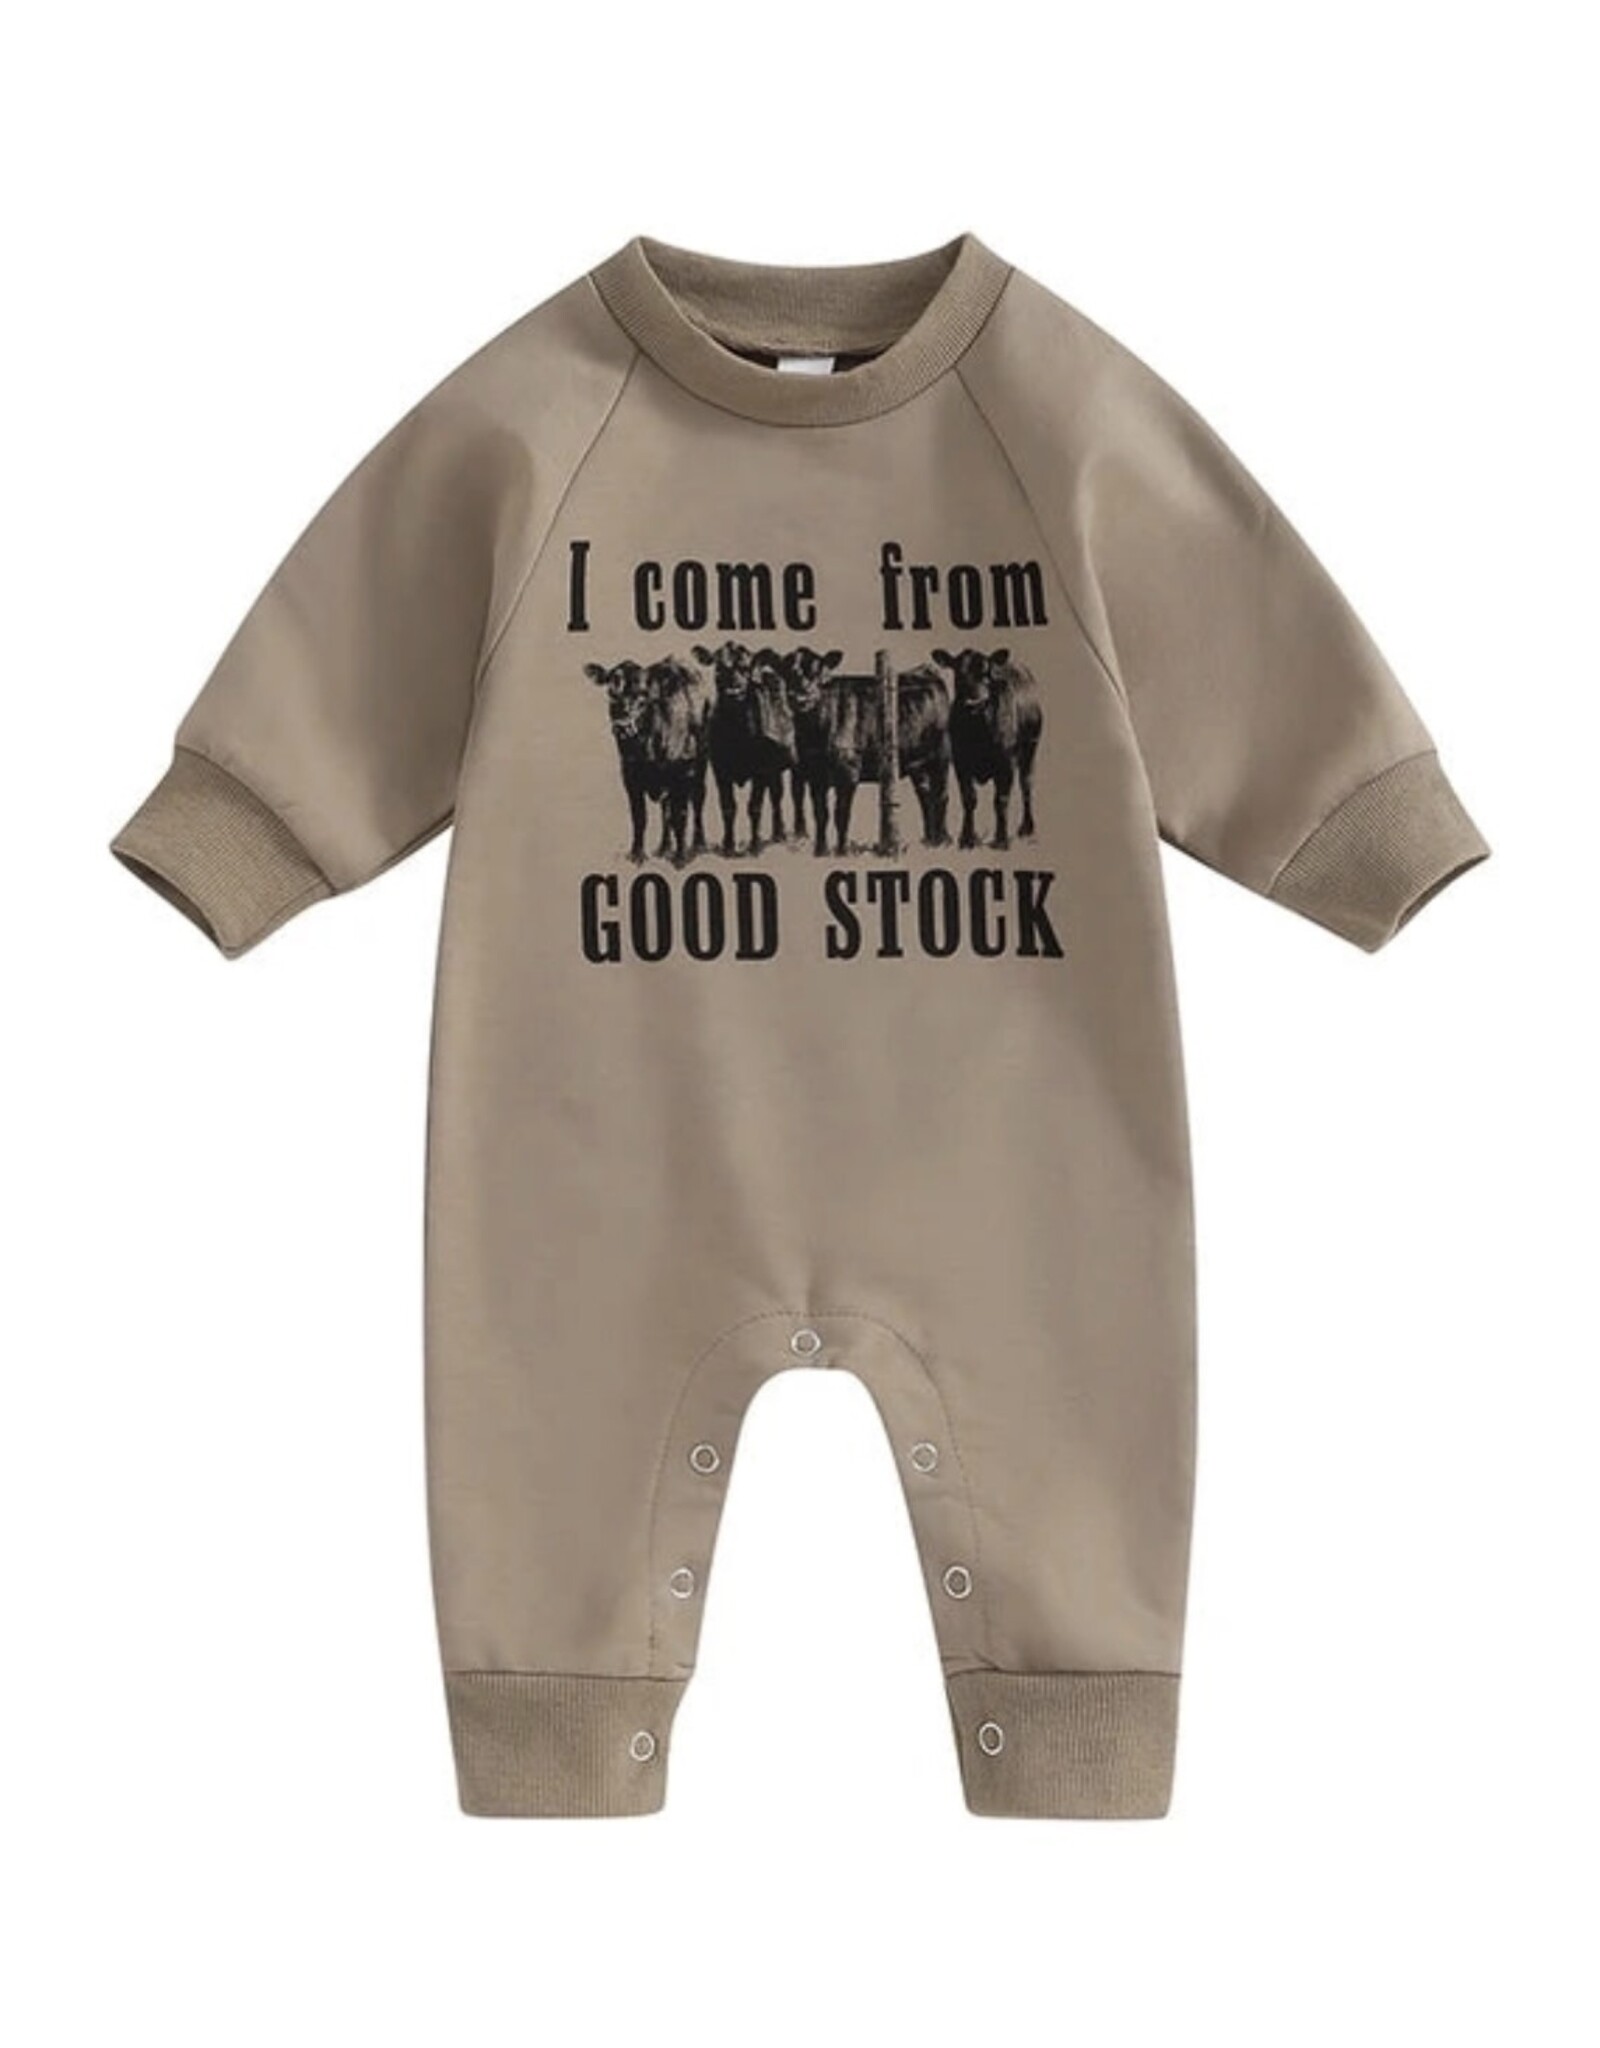 Come from Good Stock Brown Romper